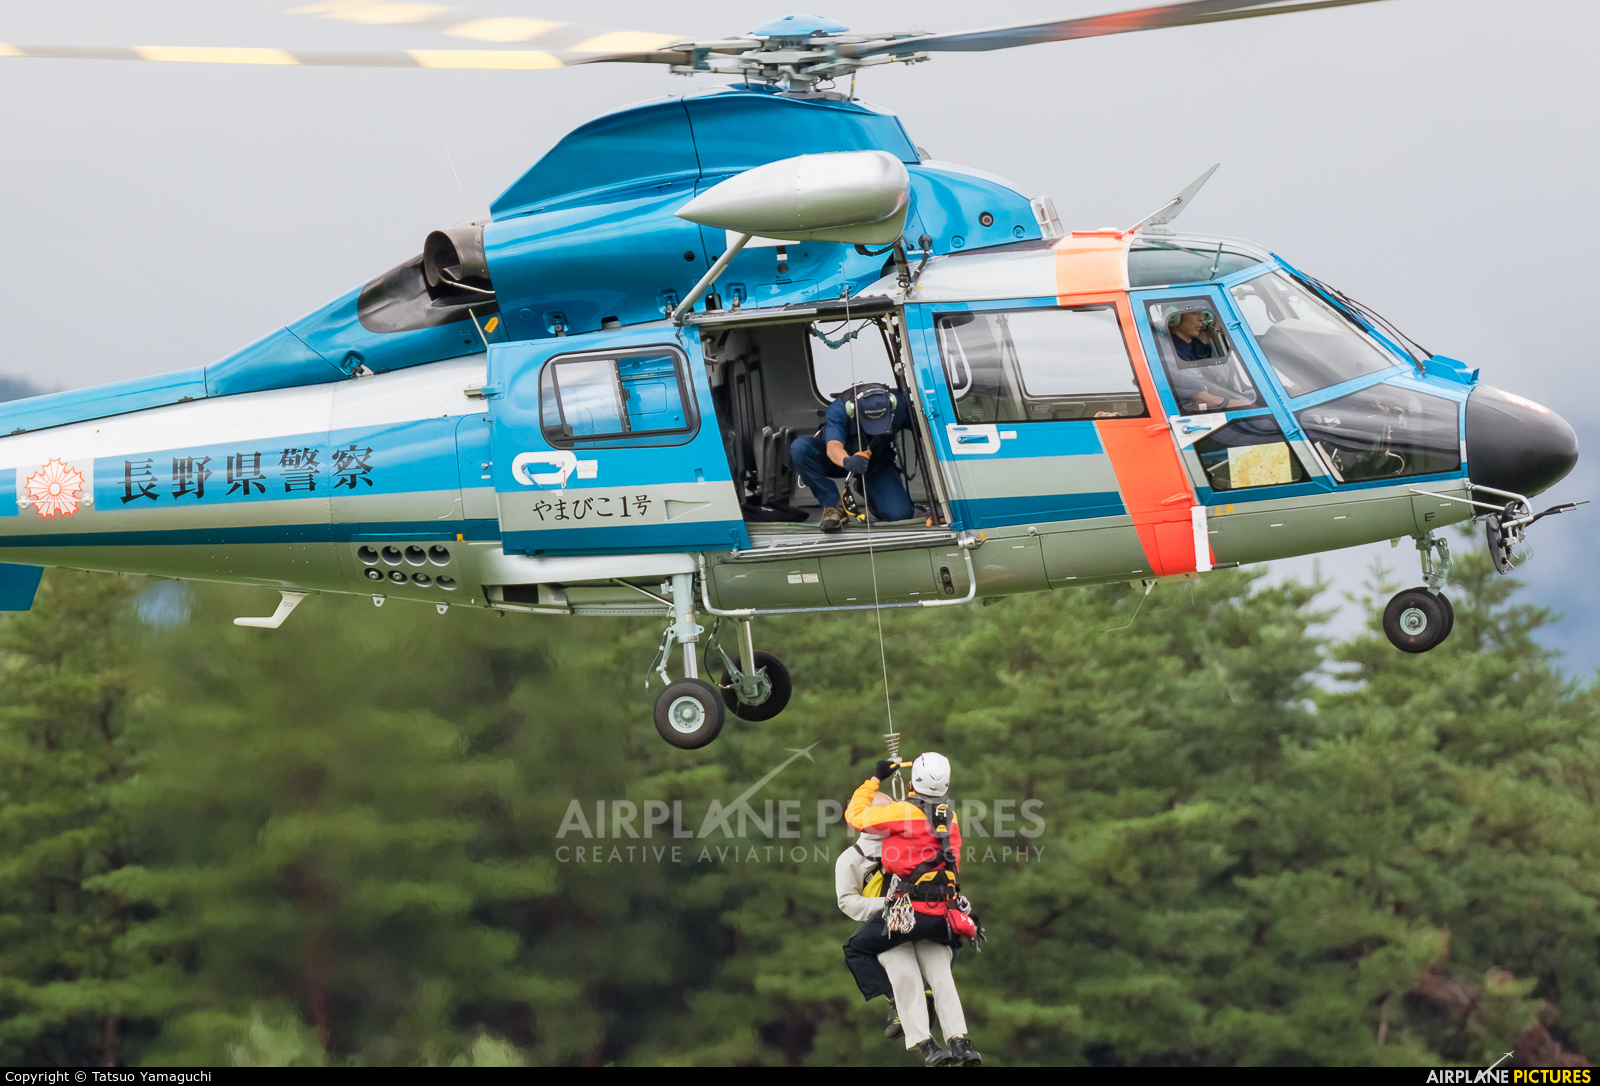 Eurocopter As365 Dauphin Wallpapers